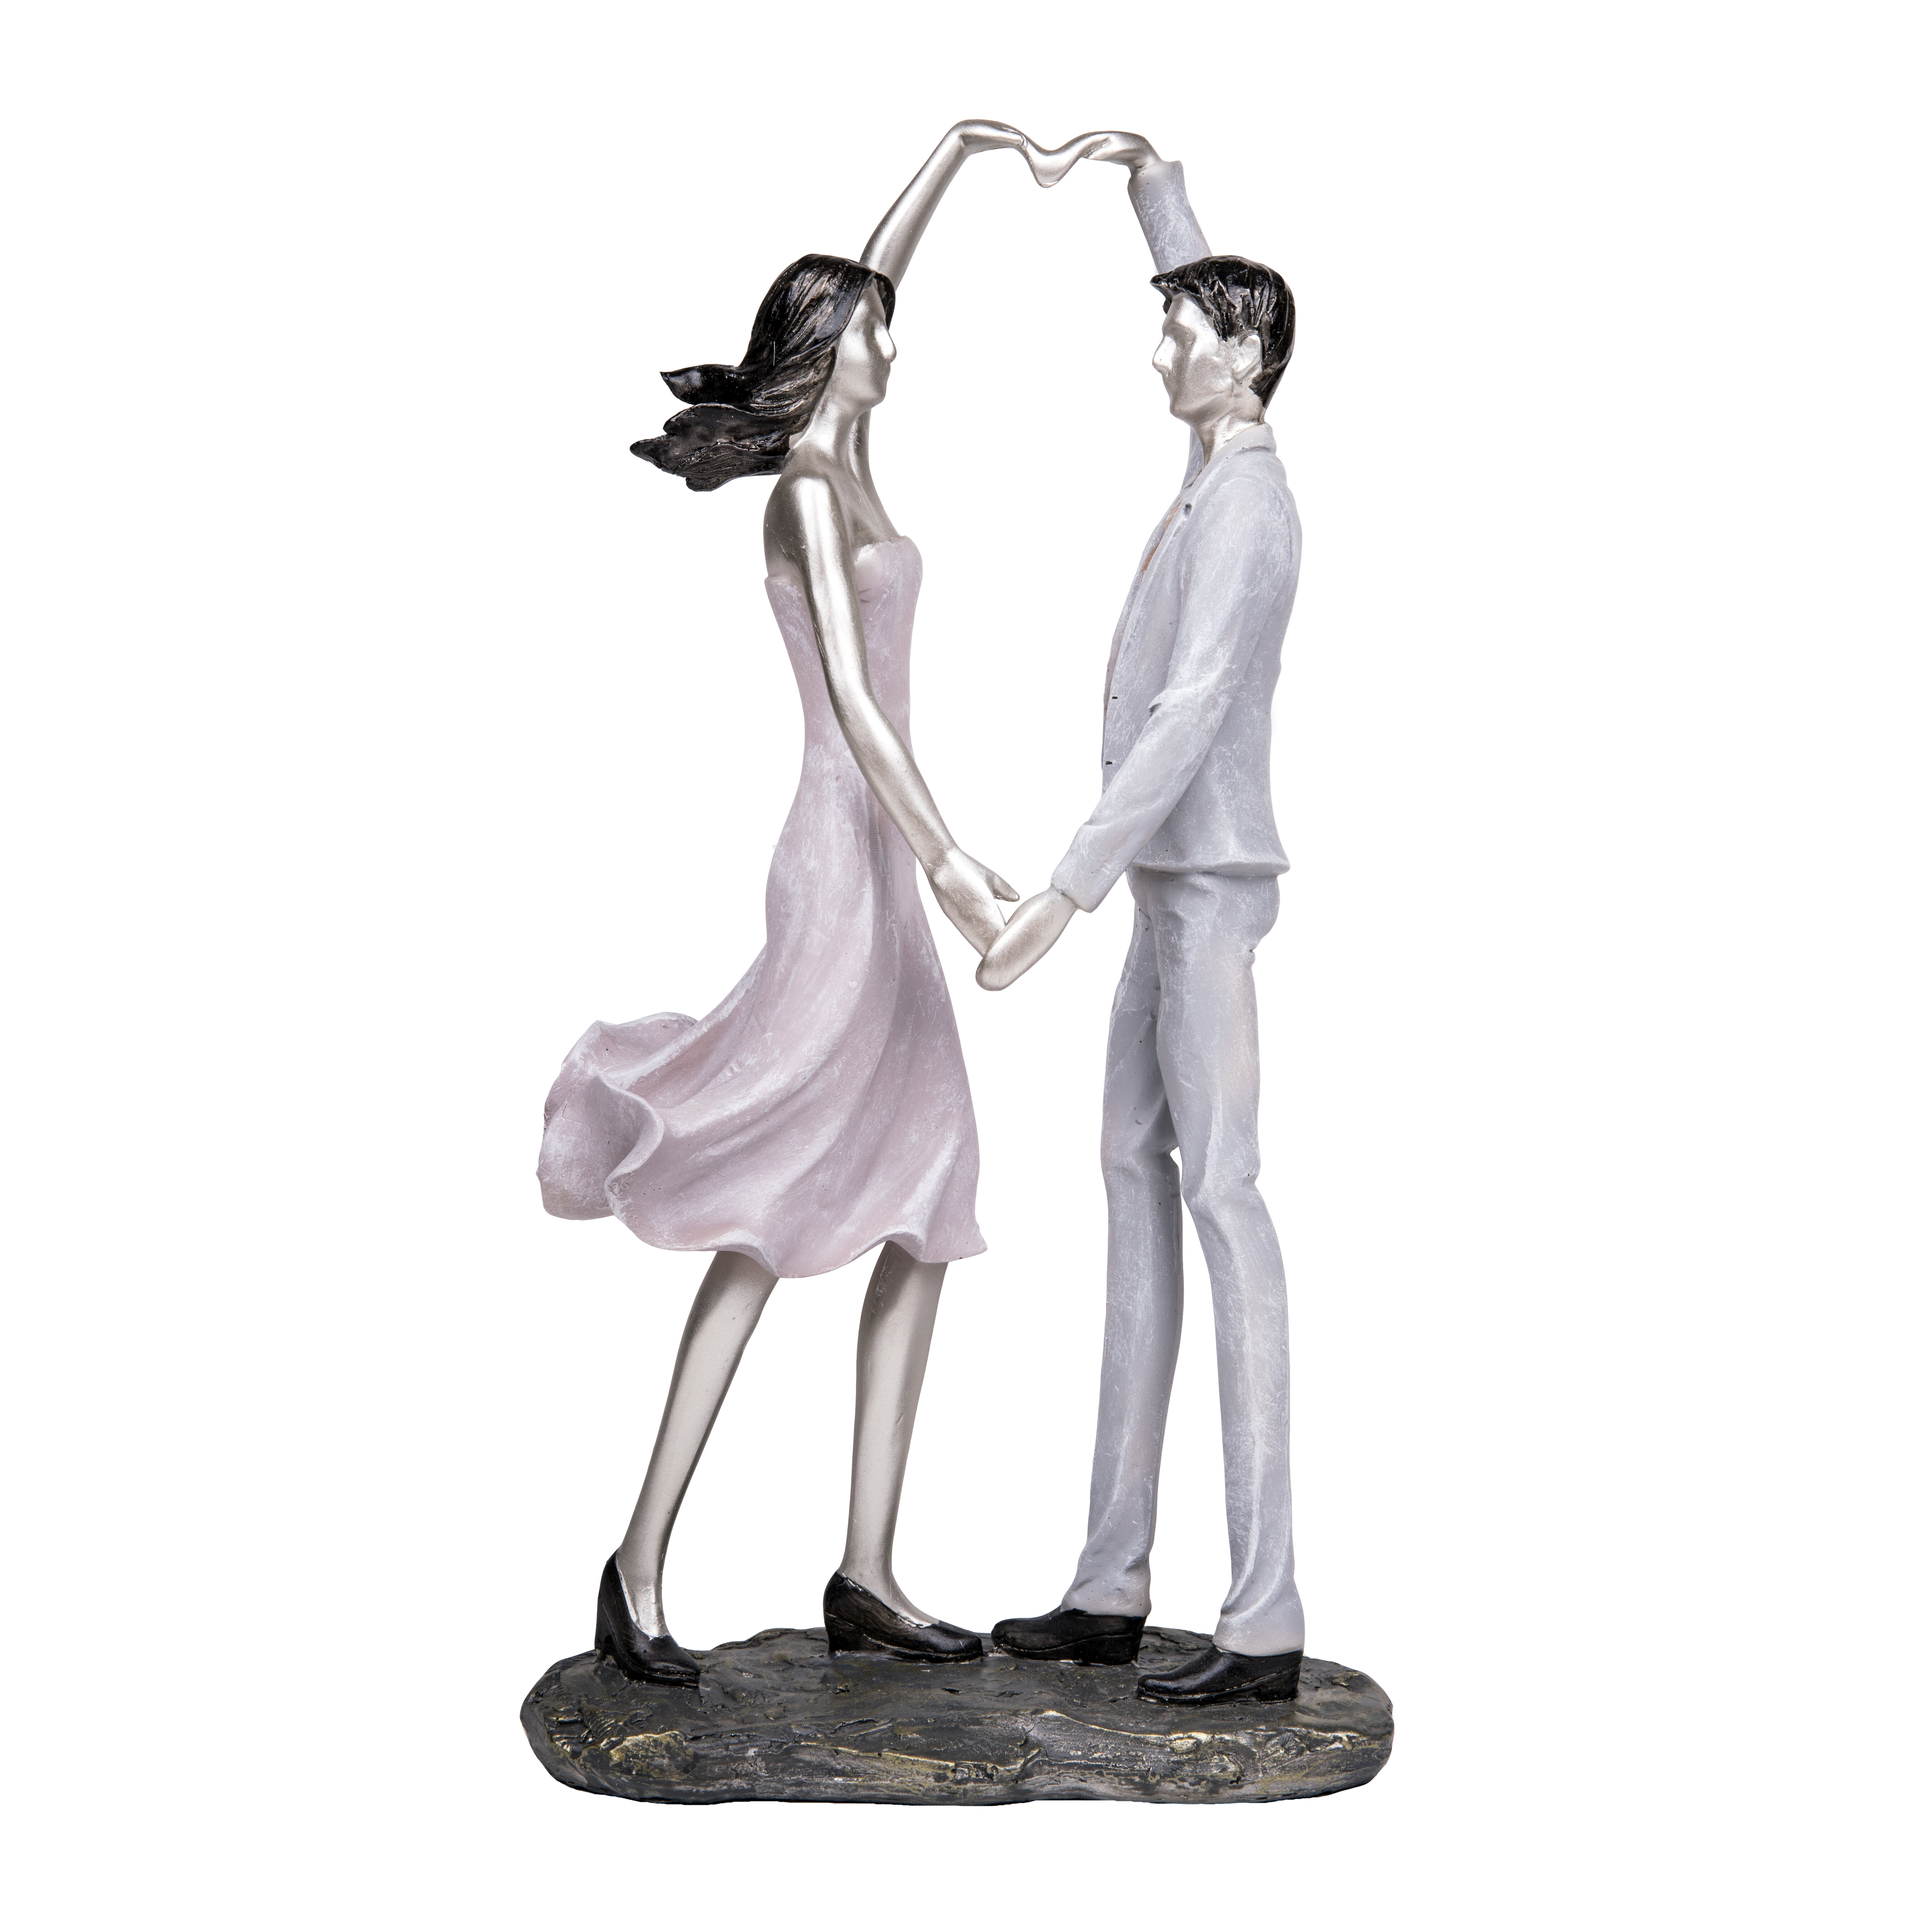 TIED RIBBONS Valentine Gift for Girlfriend Boyfriend Husband Wife -  Romantic Love Dancing Couple Statue Showpiece Decorative Items for Home  Decor Bedroom Table Decoration (33 cm x 20.3 cm) : Amazon.in: Home & Kitchen